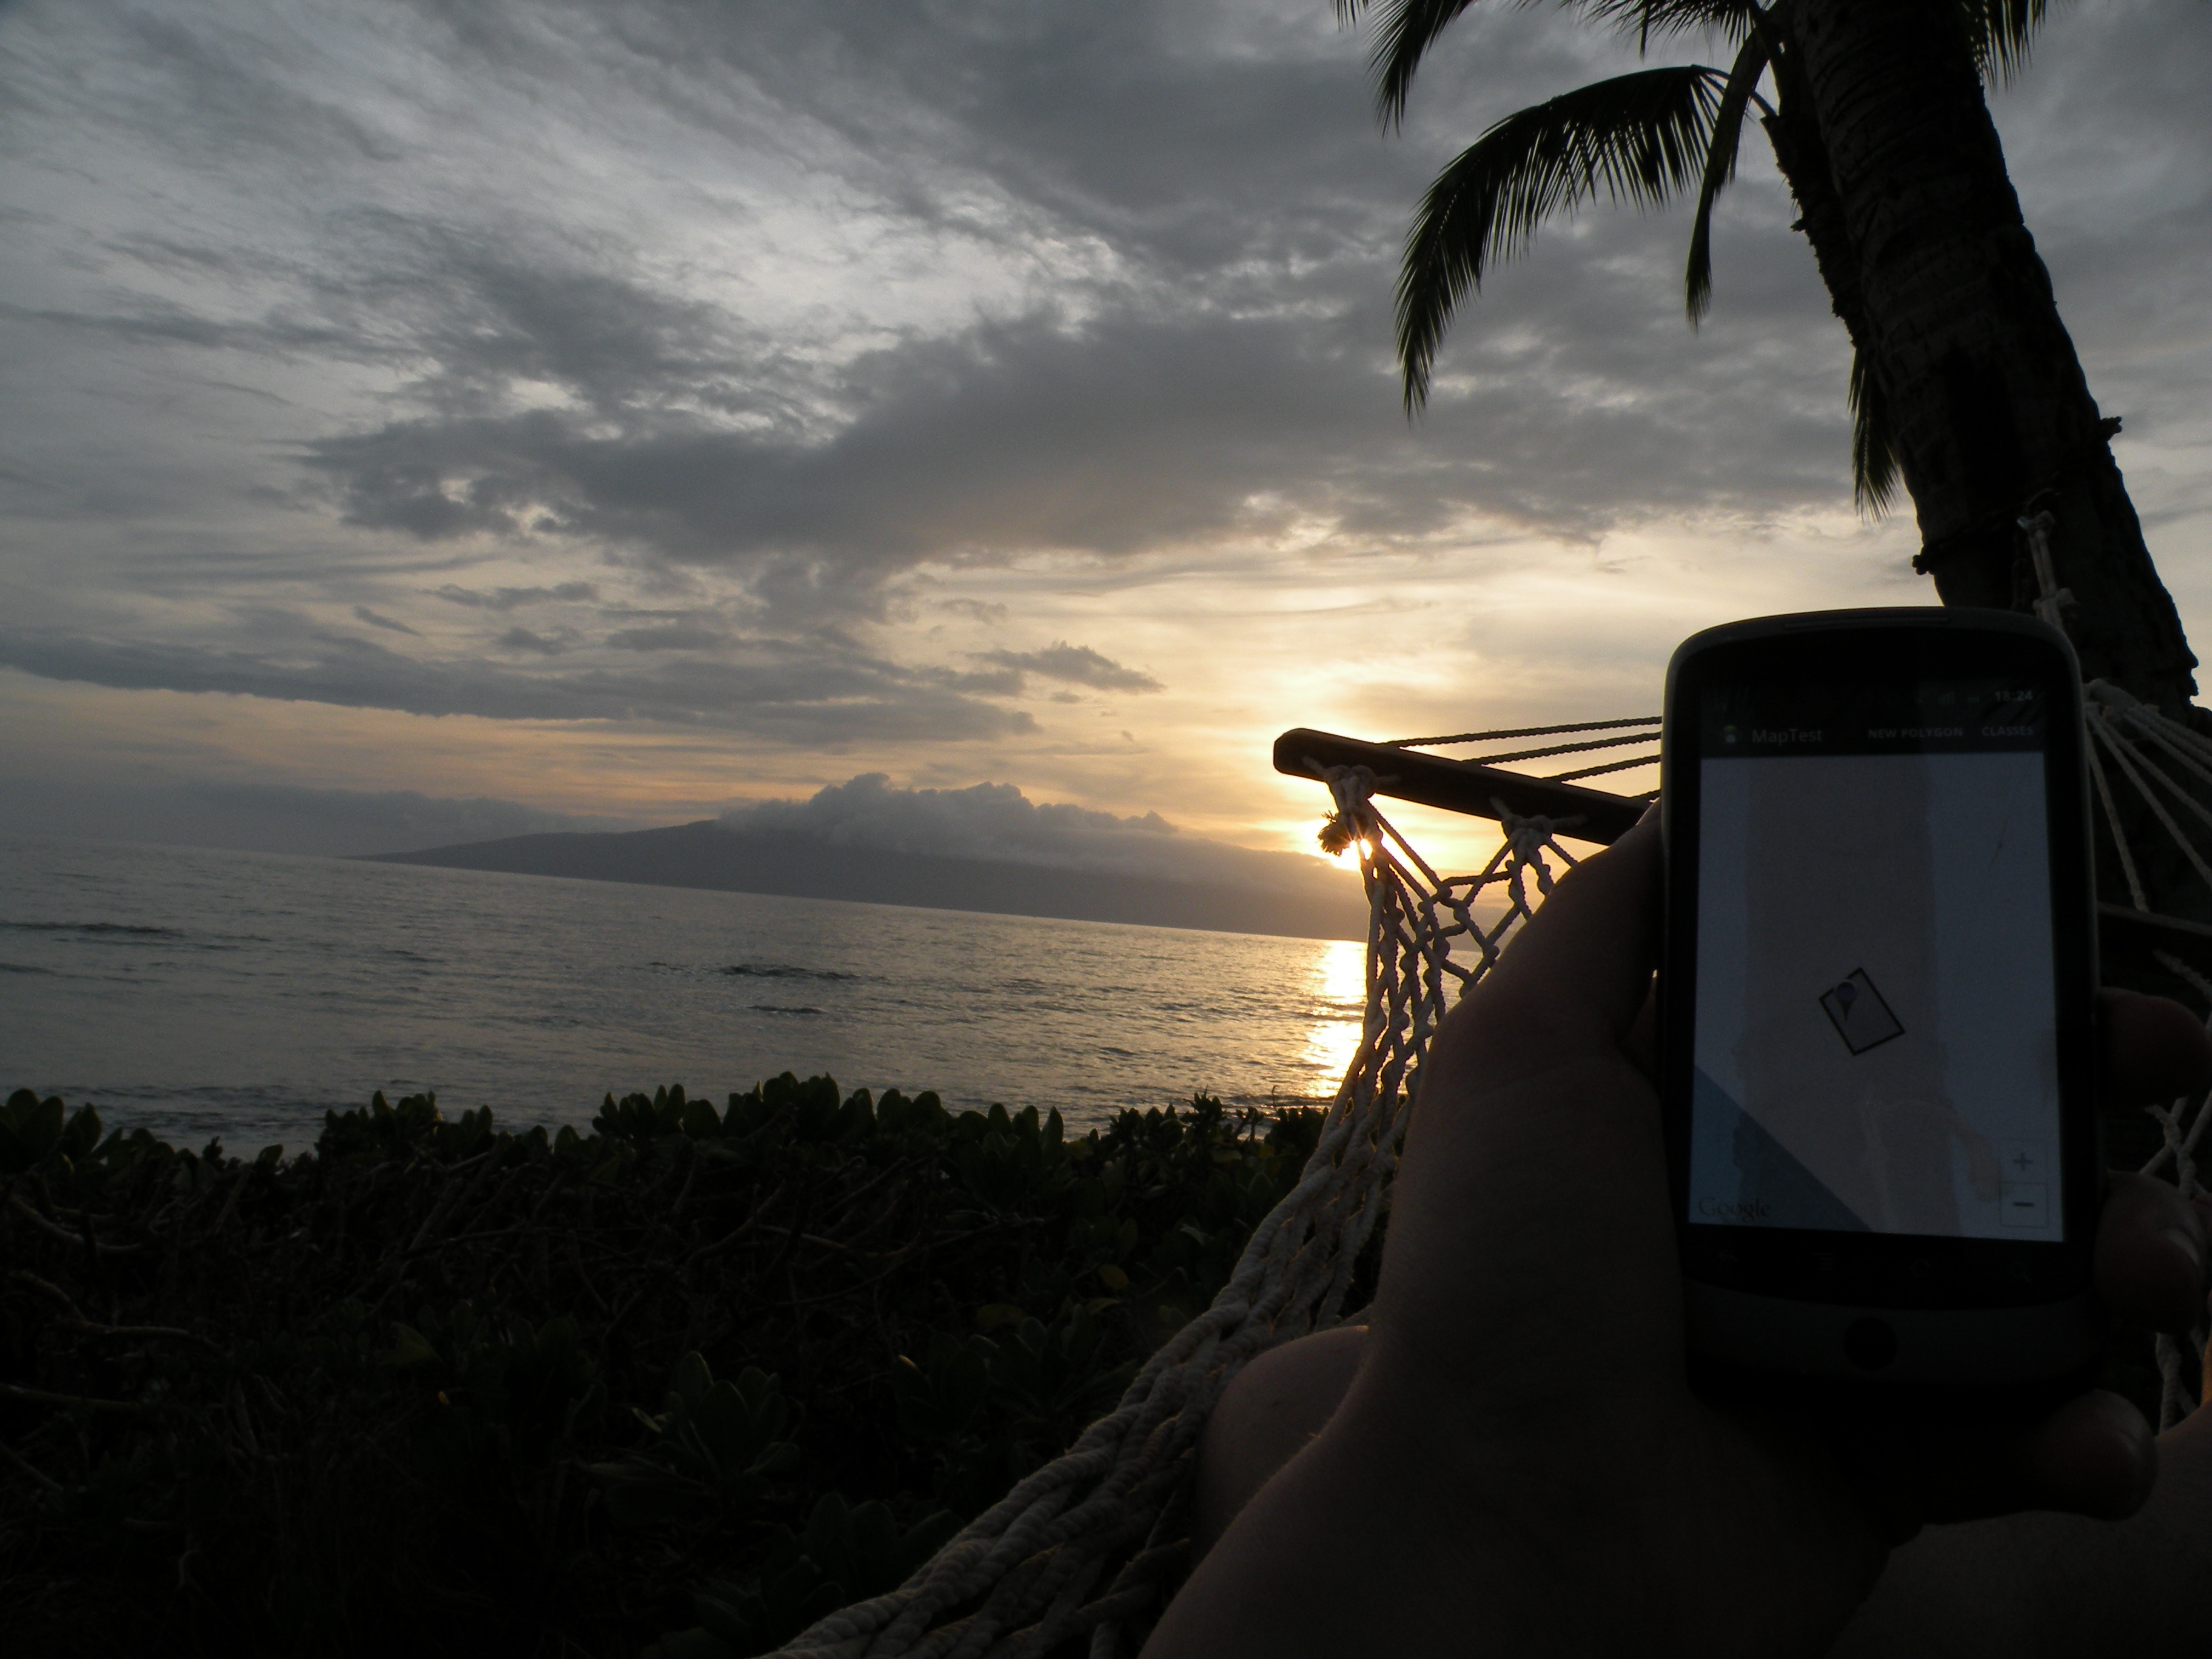 Demo from hammock of geofencing on Android with sunset int he background.